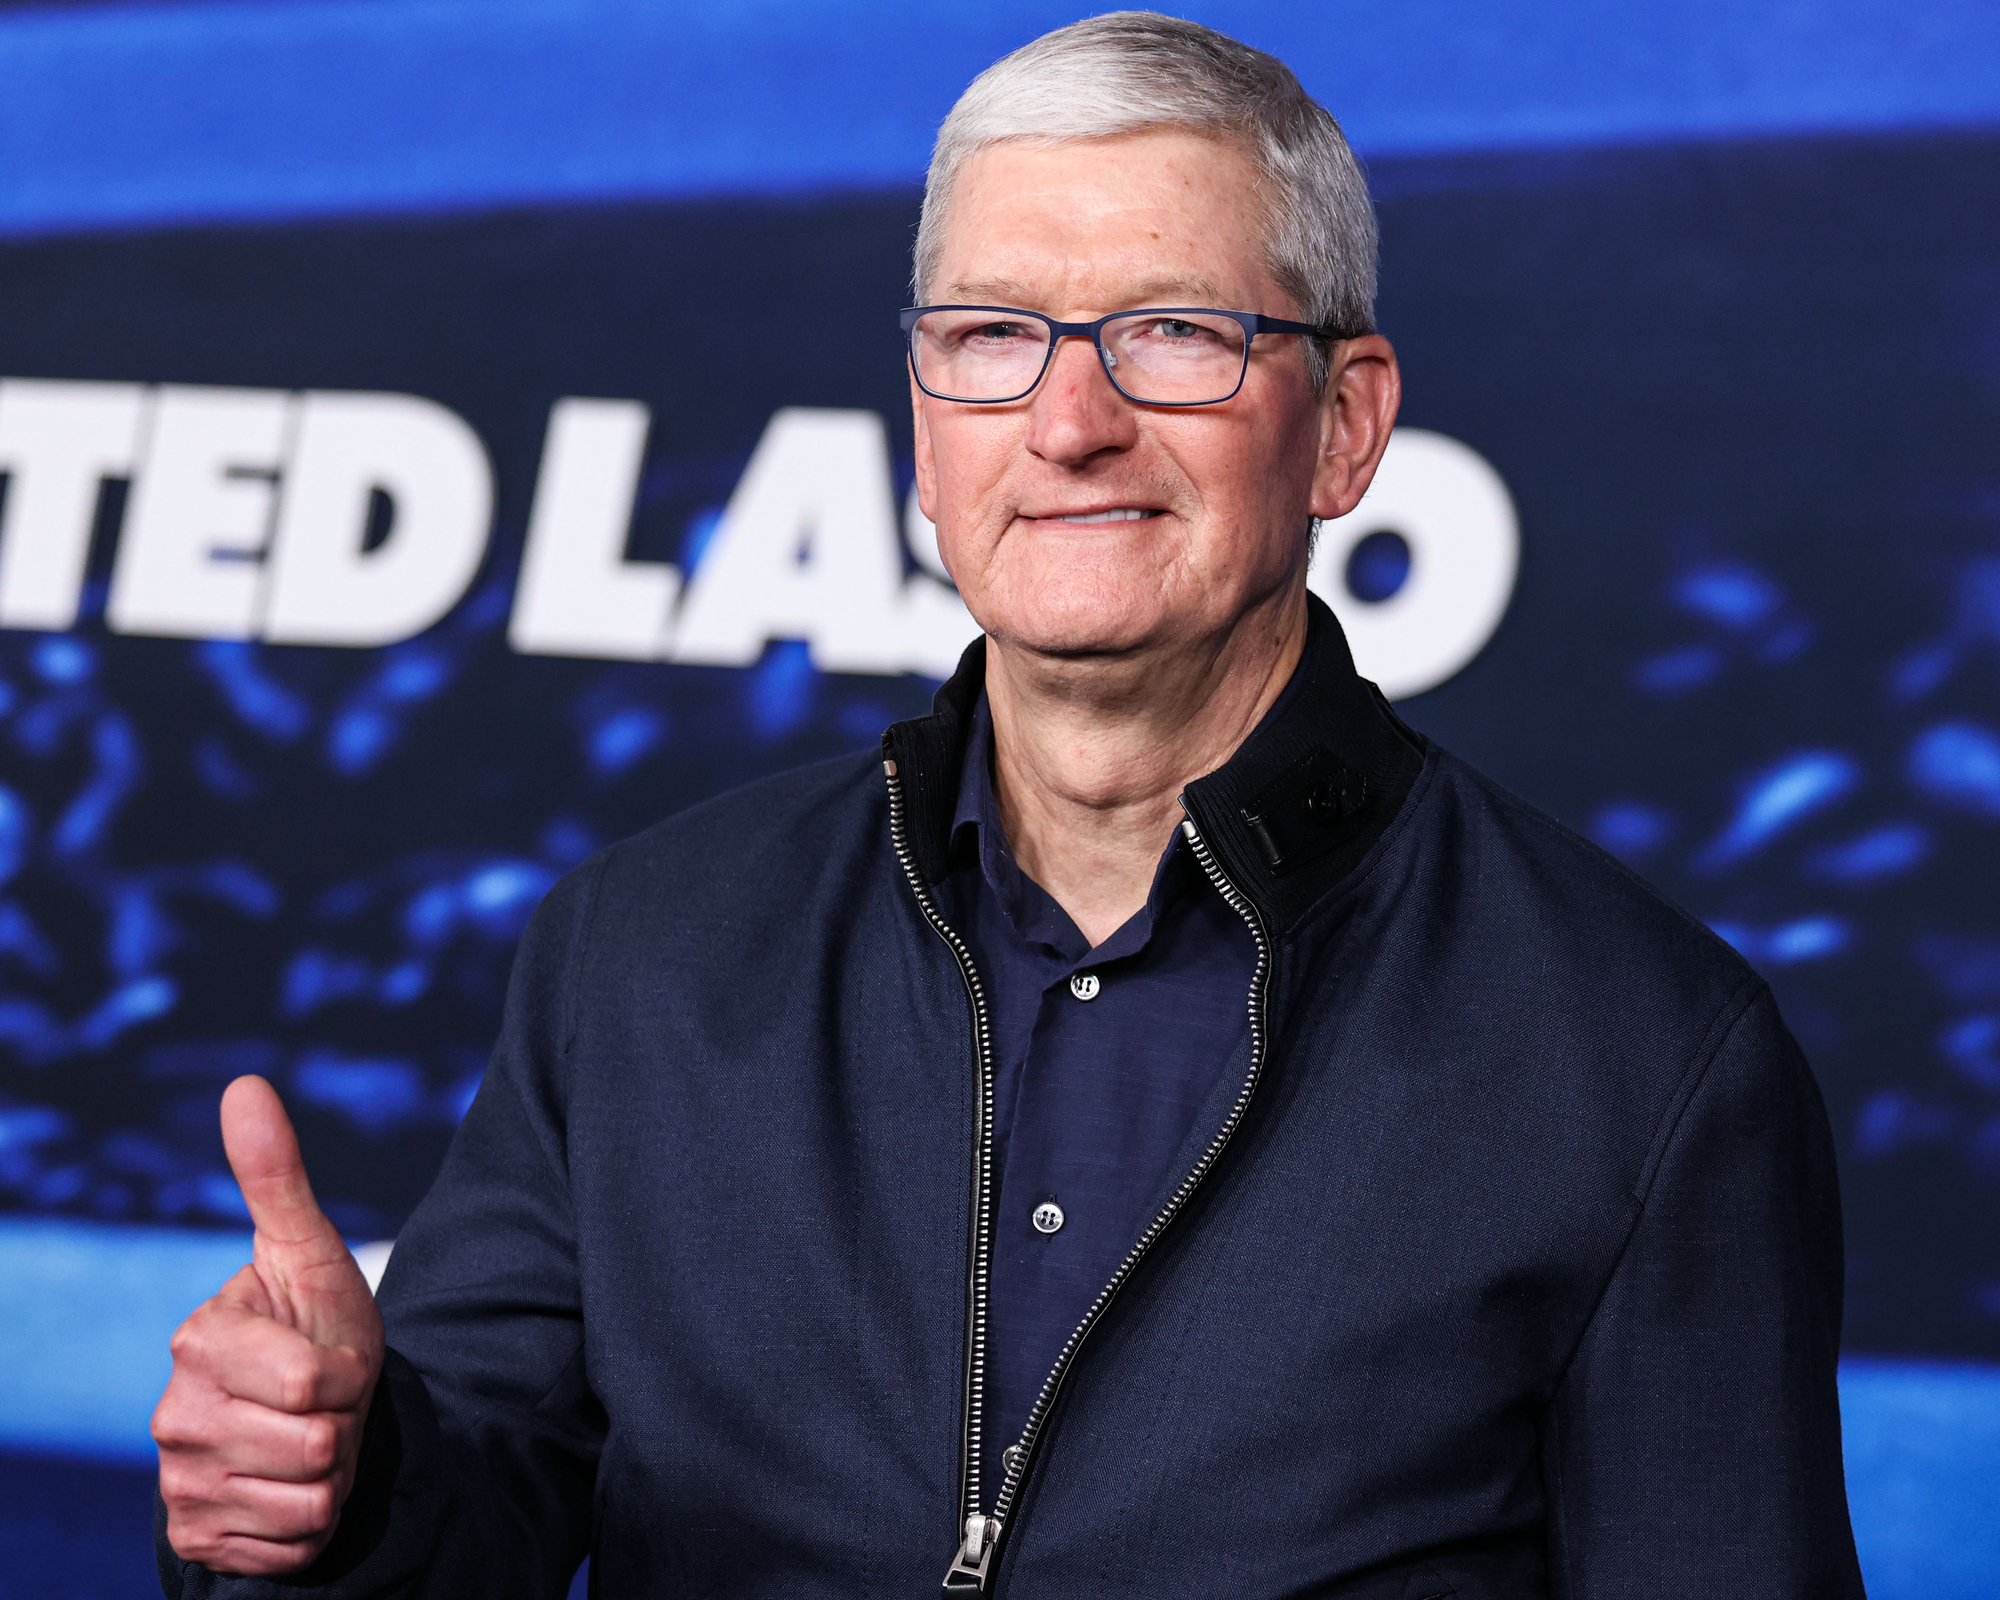 Chief Executive Officer of Apple Tim Cook arrives at the Los Angeles Premiere Of Apple TV+'s Original Series 'Ted Lasso' Season 3 held at the Regency Village Theatre on March 7, 2023 in Westwood, Los Angeles, California, United States. (Photo by Xavier Collin/Image Press Agency)